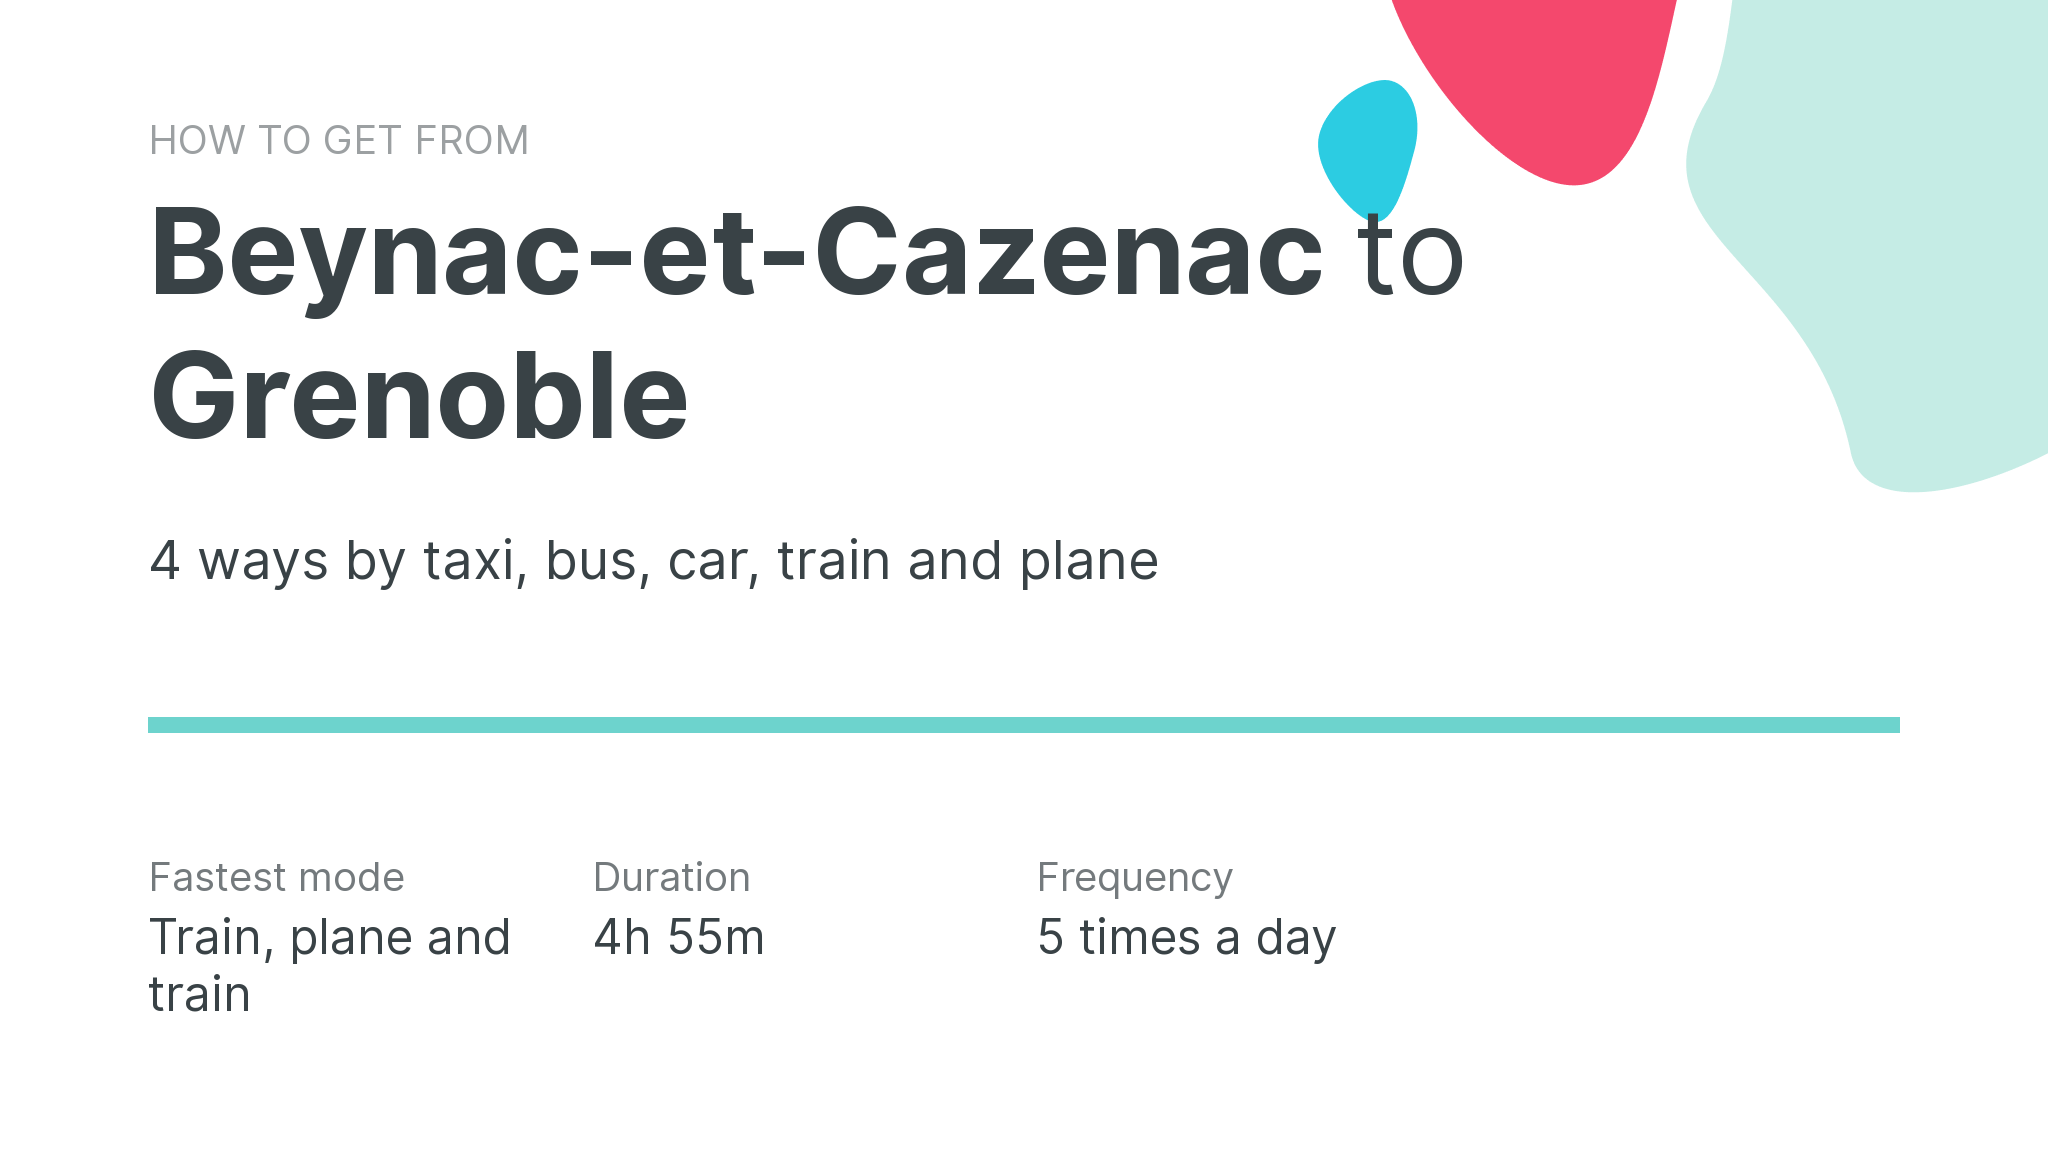 How do I get from Beynac-et-Cazenac to Grenoble